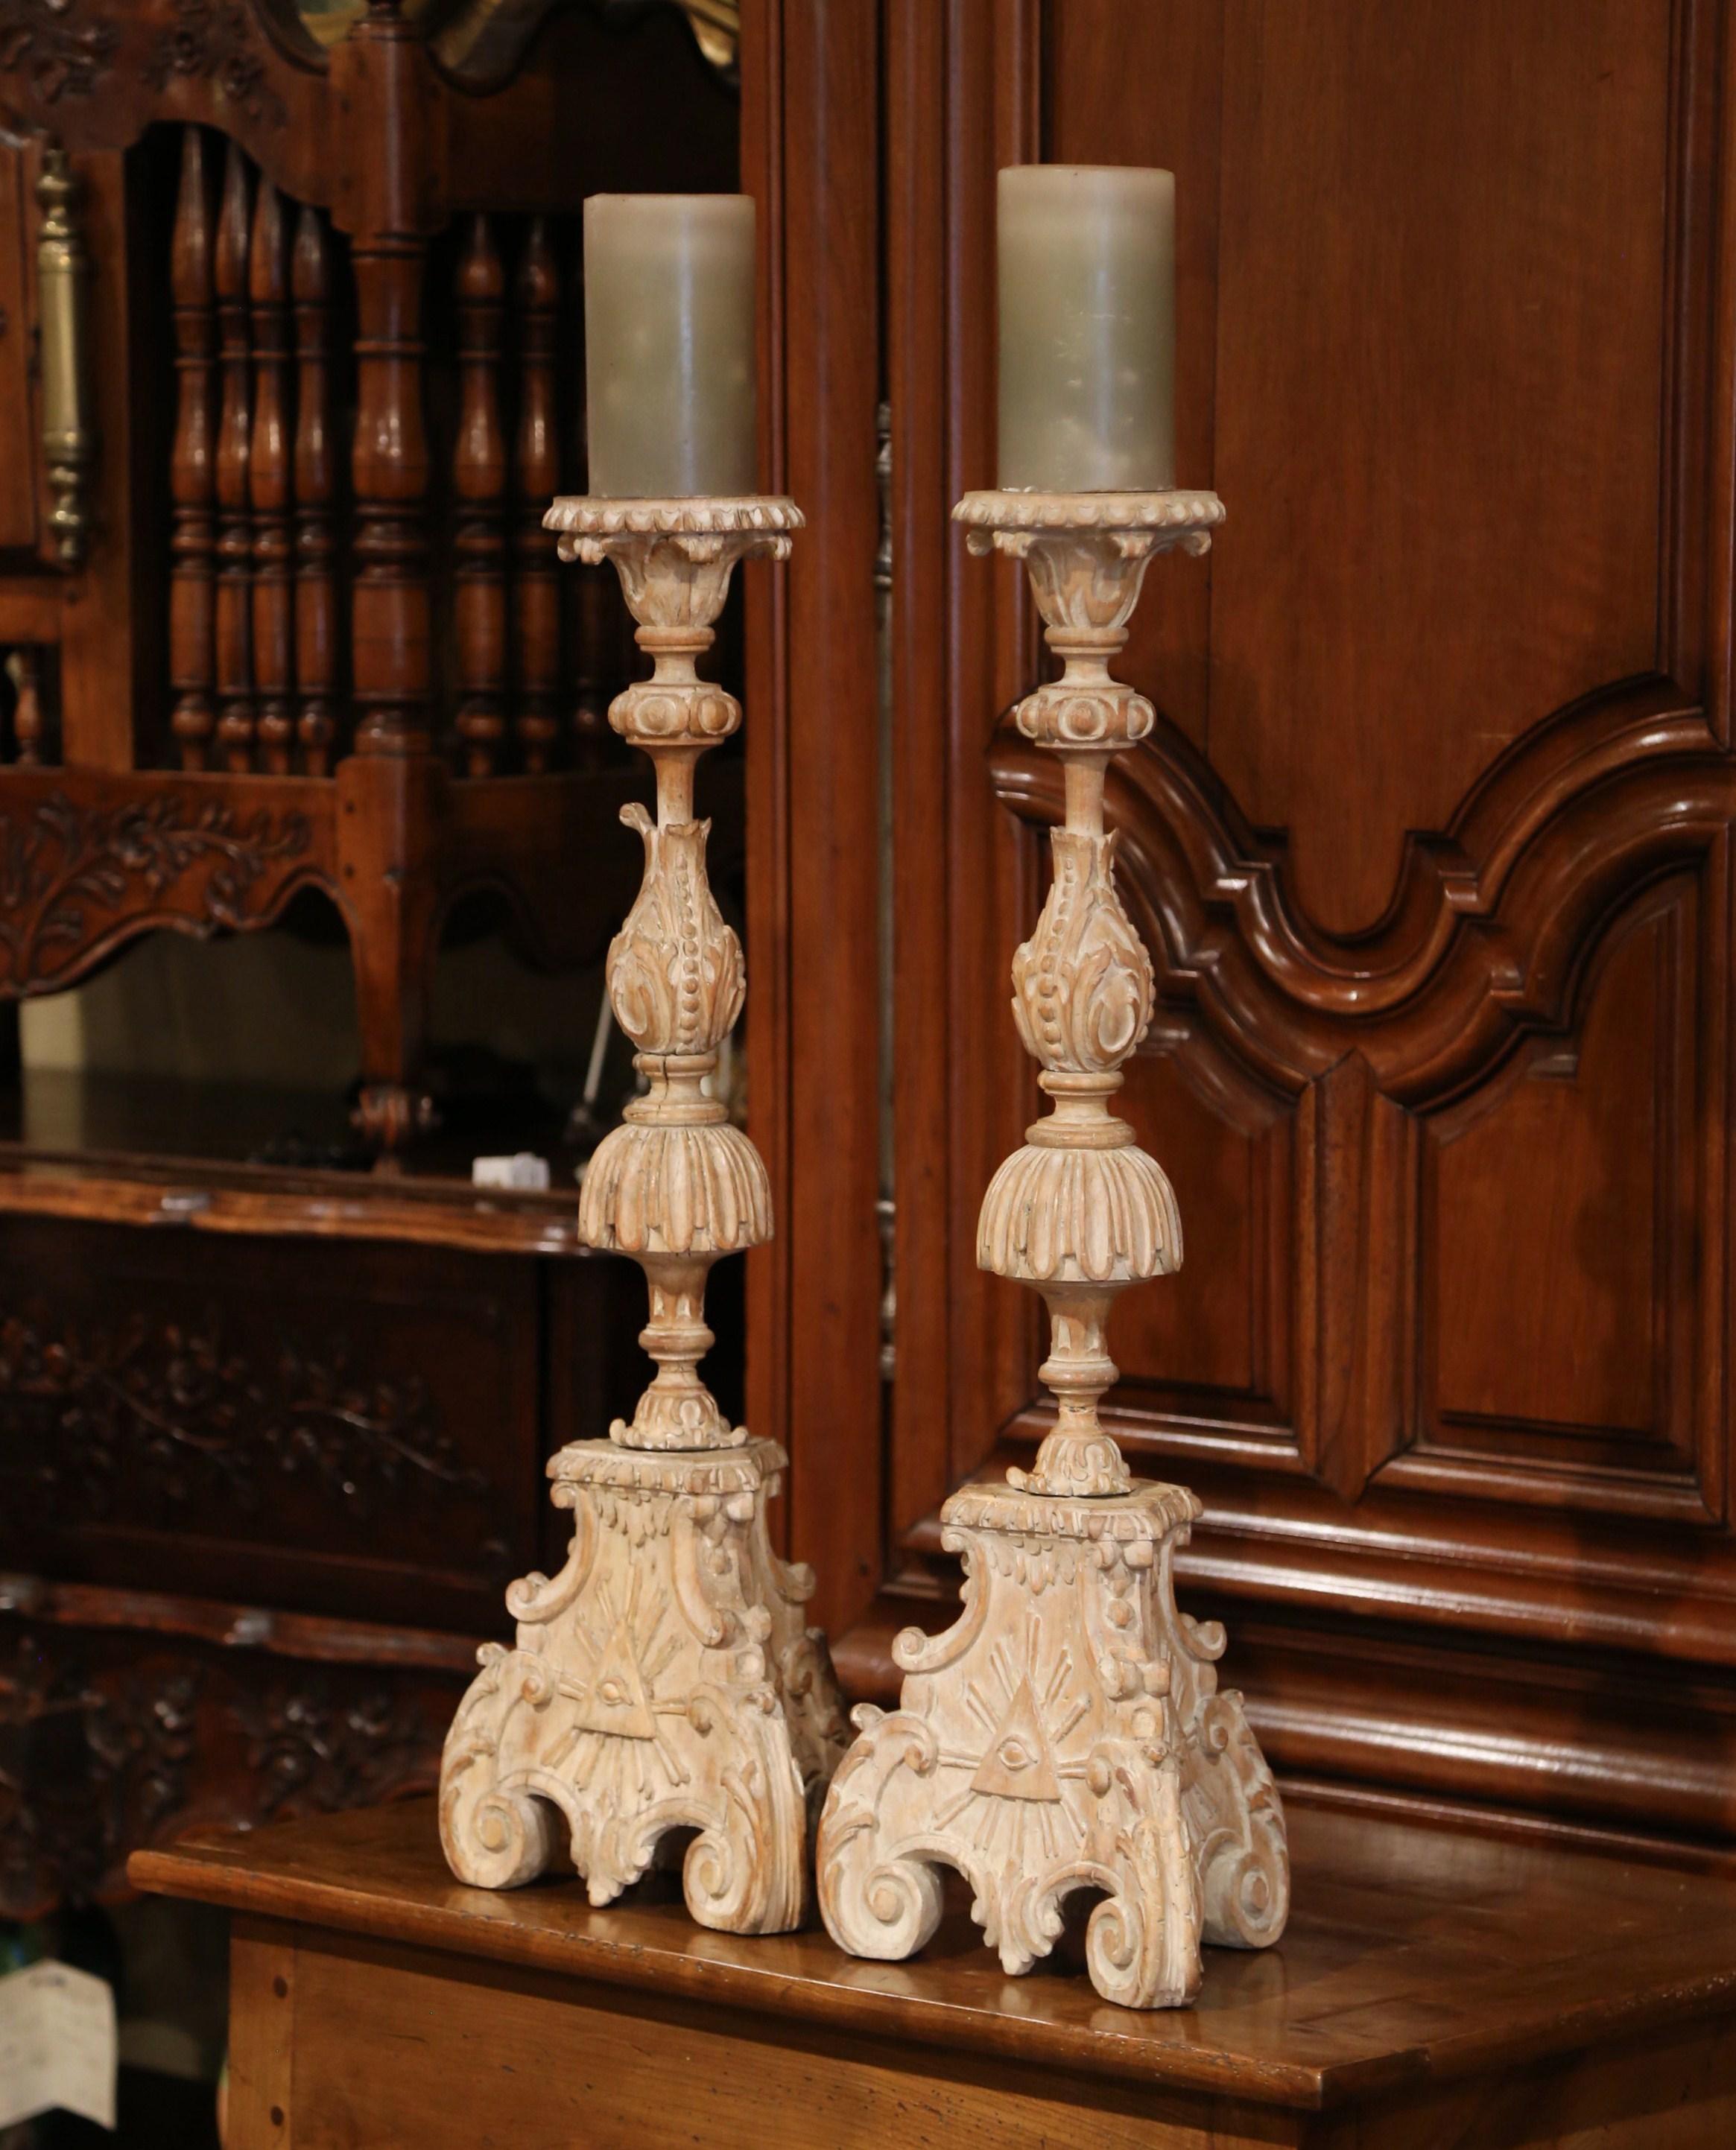 These elegant carved fruitwood Pic-Cierges were probably created in France or Italy, circa 1870. Sitting on three small Louis XV scroll feet, the tall antique candlesticks features a three-side base with the Eye of Providence carving on all three